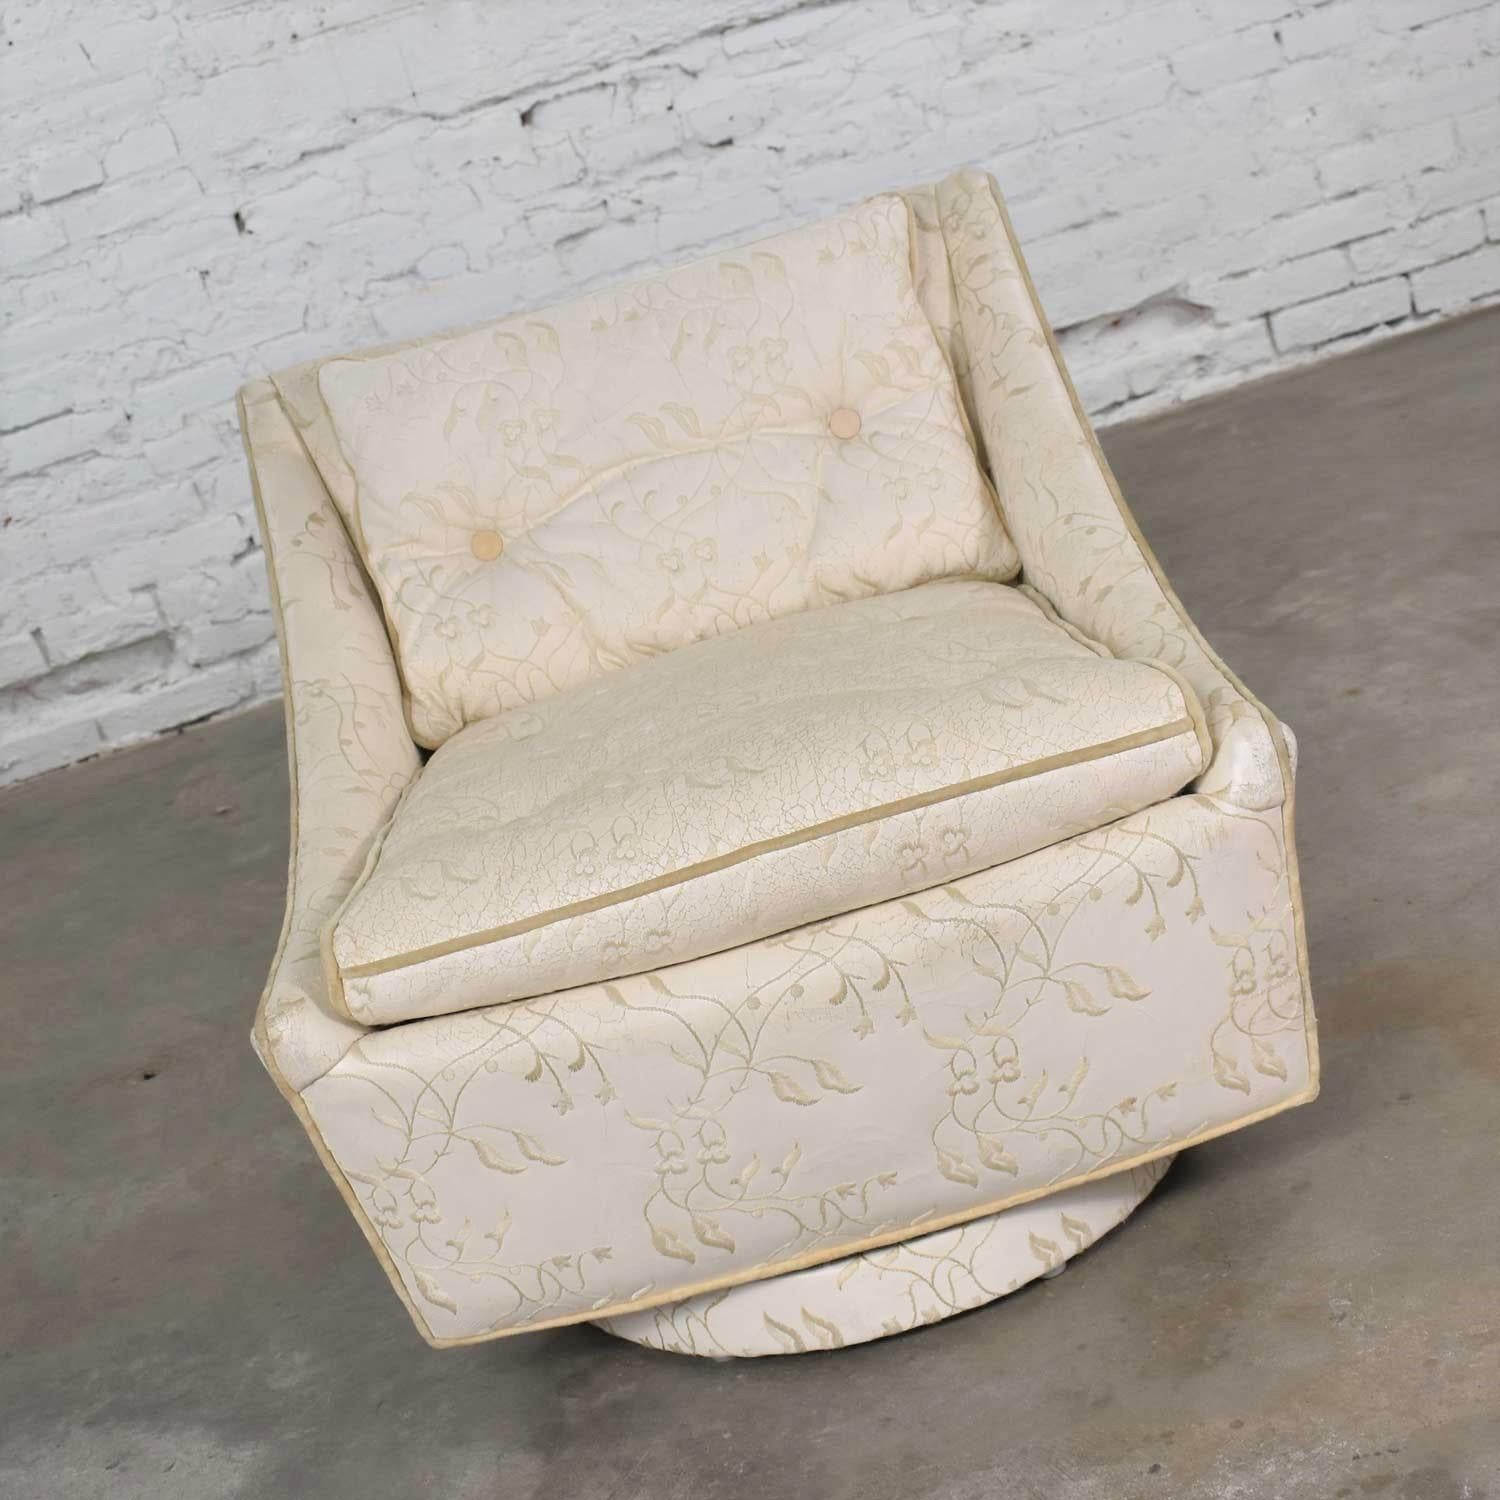 Canvas Vintage Art Deco Petite White Swivel Chair Embroidered Leather by Oxford Ltd. For Sale